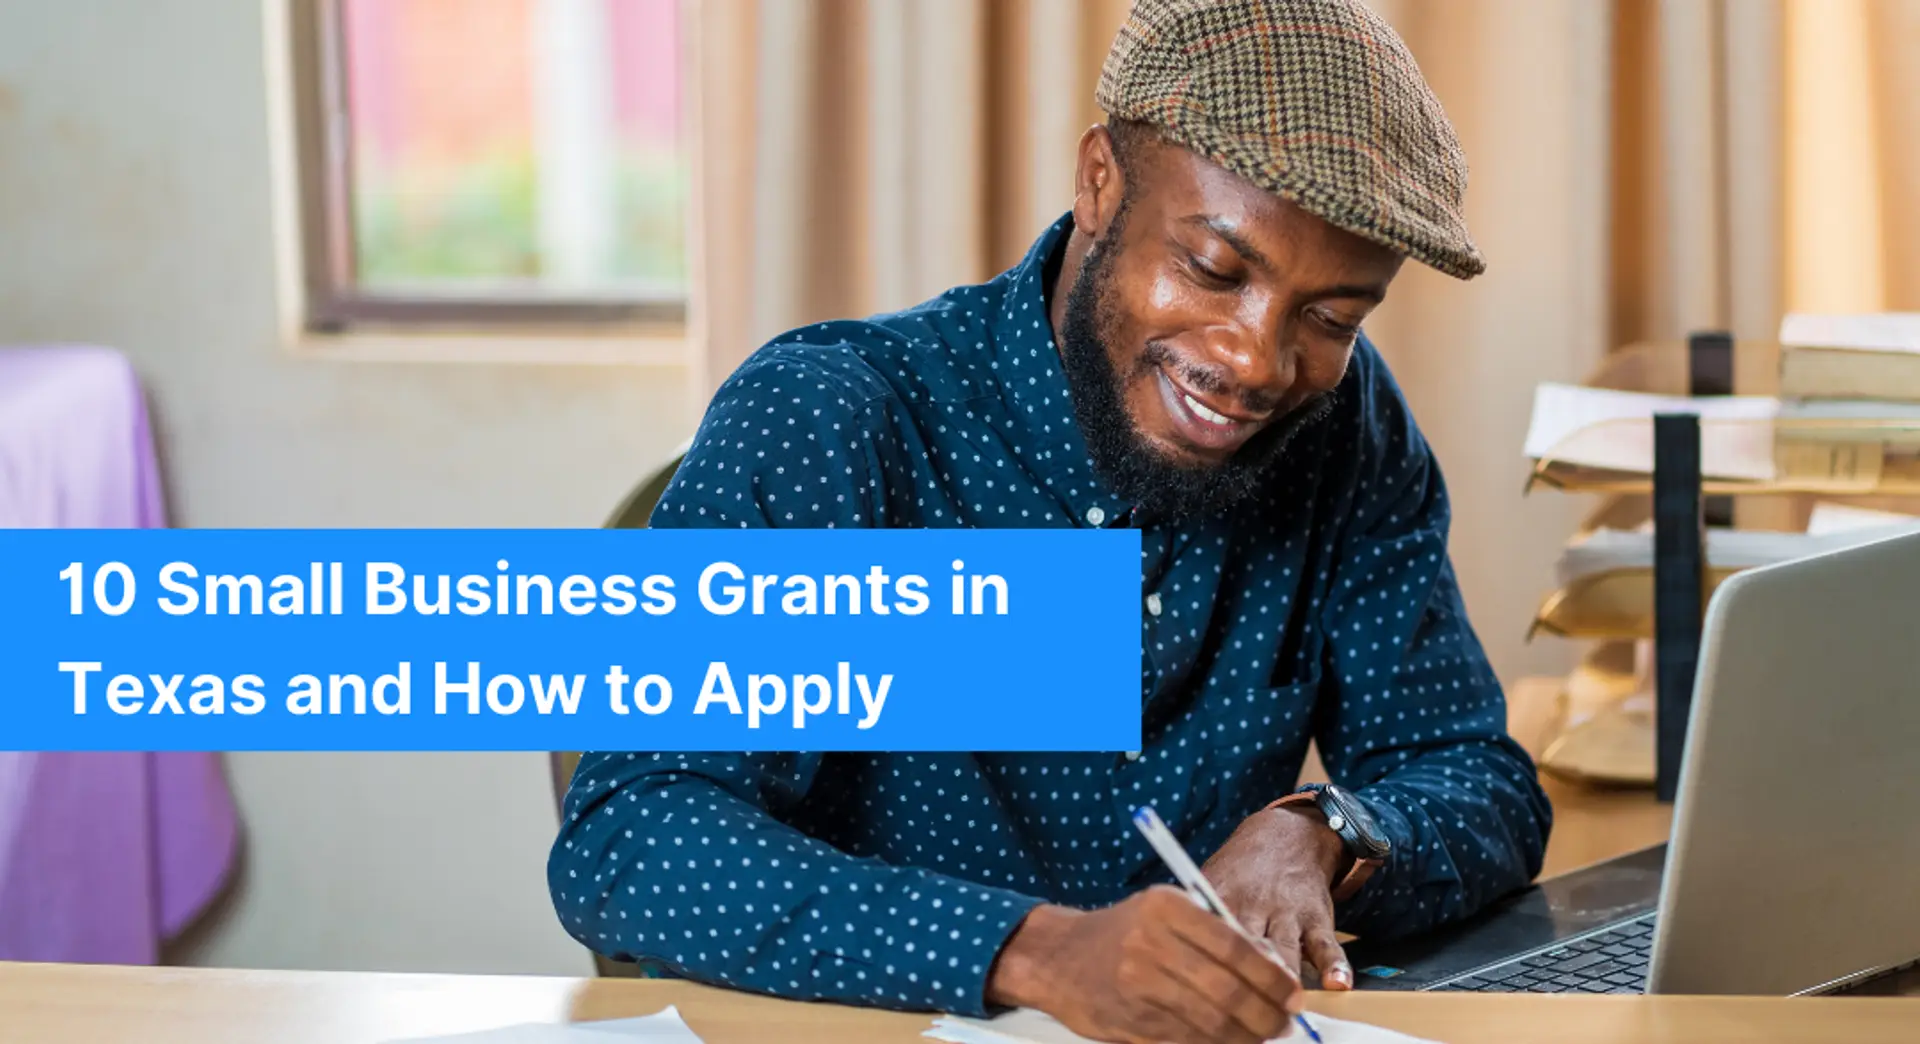 10 Small Business Grants in Texas and How to Apply